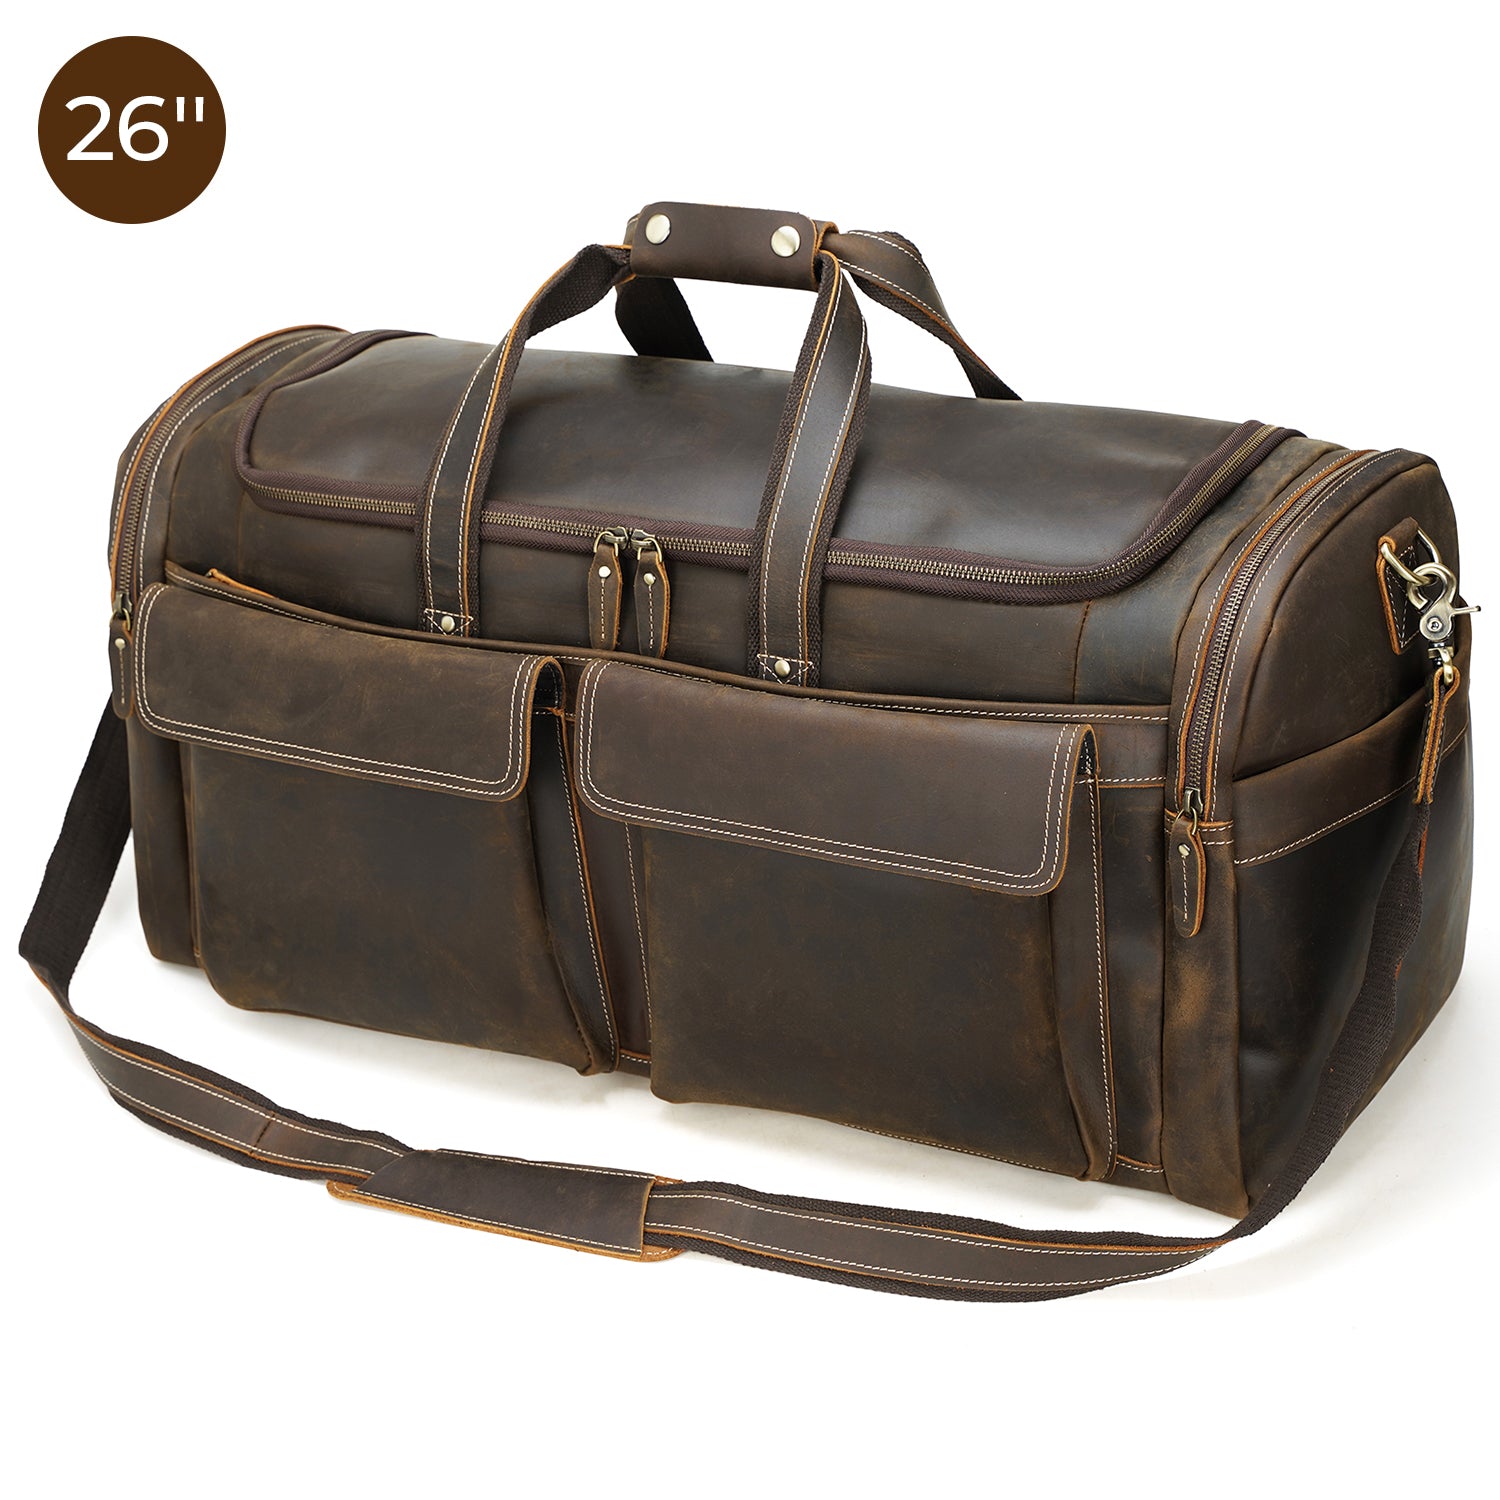  Polare 23” Waterproof Travel Duffel Bag Waxed Canvas Cowhide Leather  Trim Luggage for Gym 55L Weekender Overnight Carry on Bag (Brown-23)